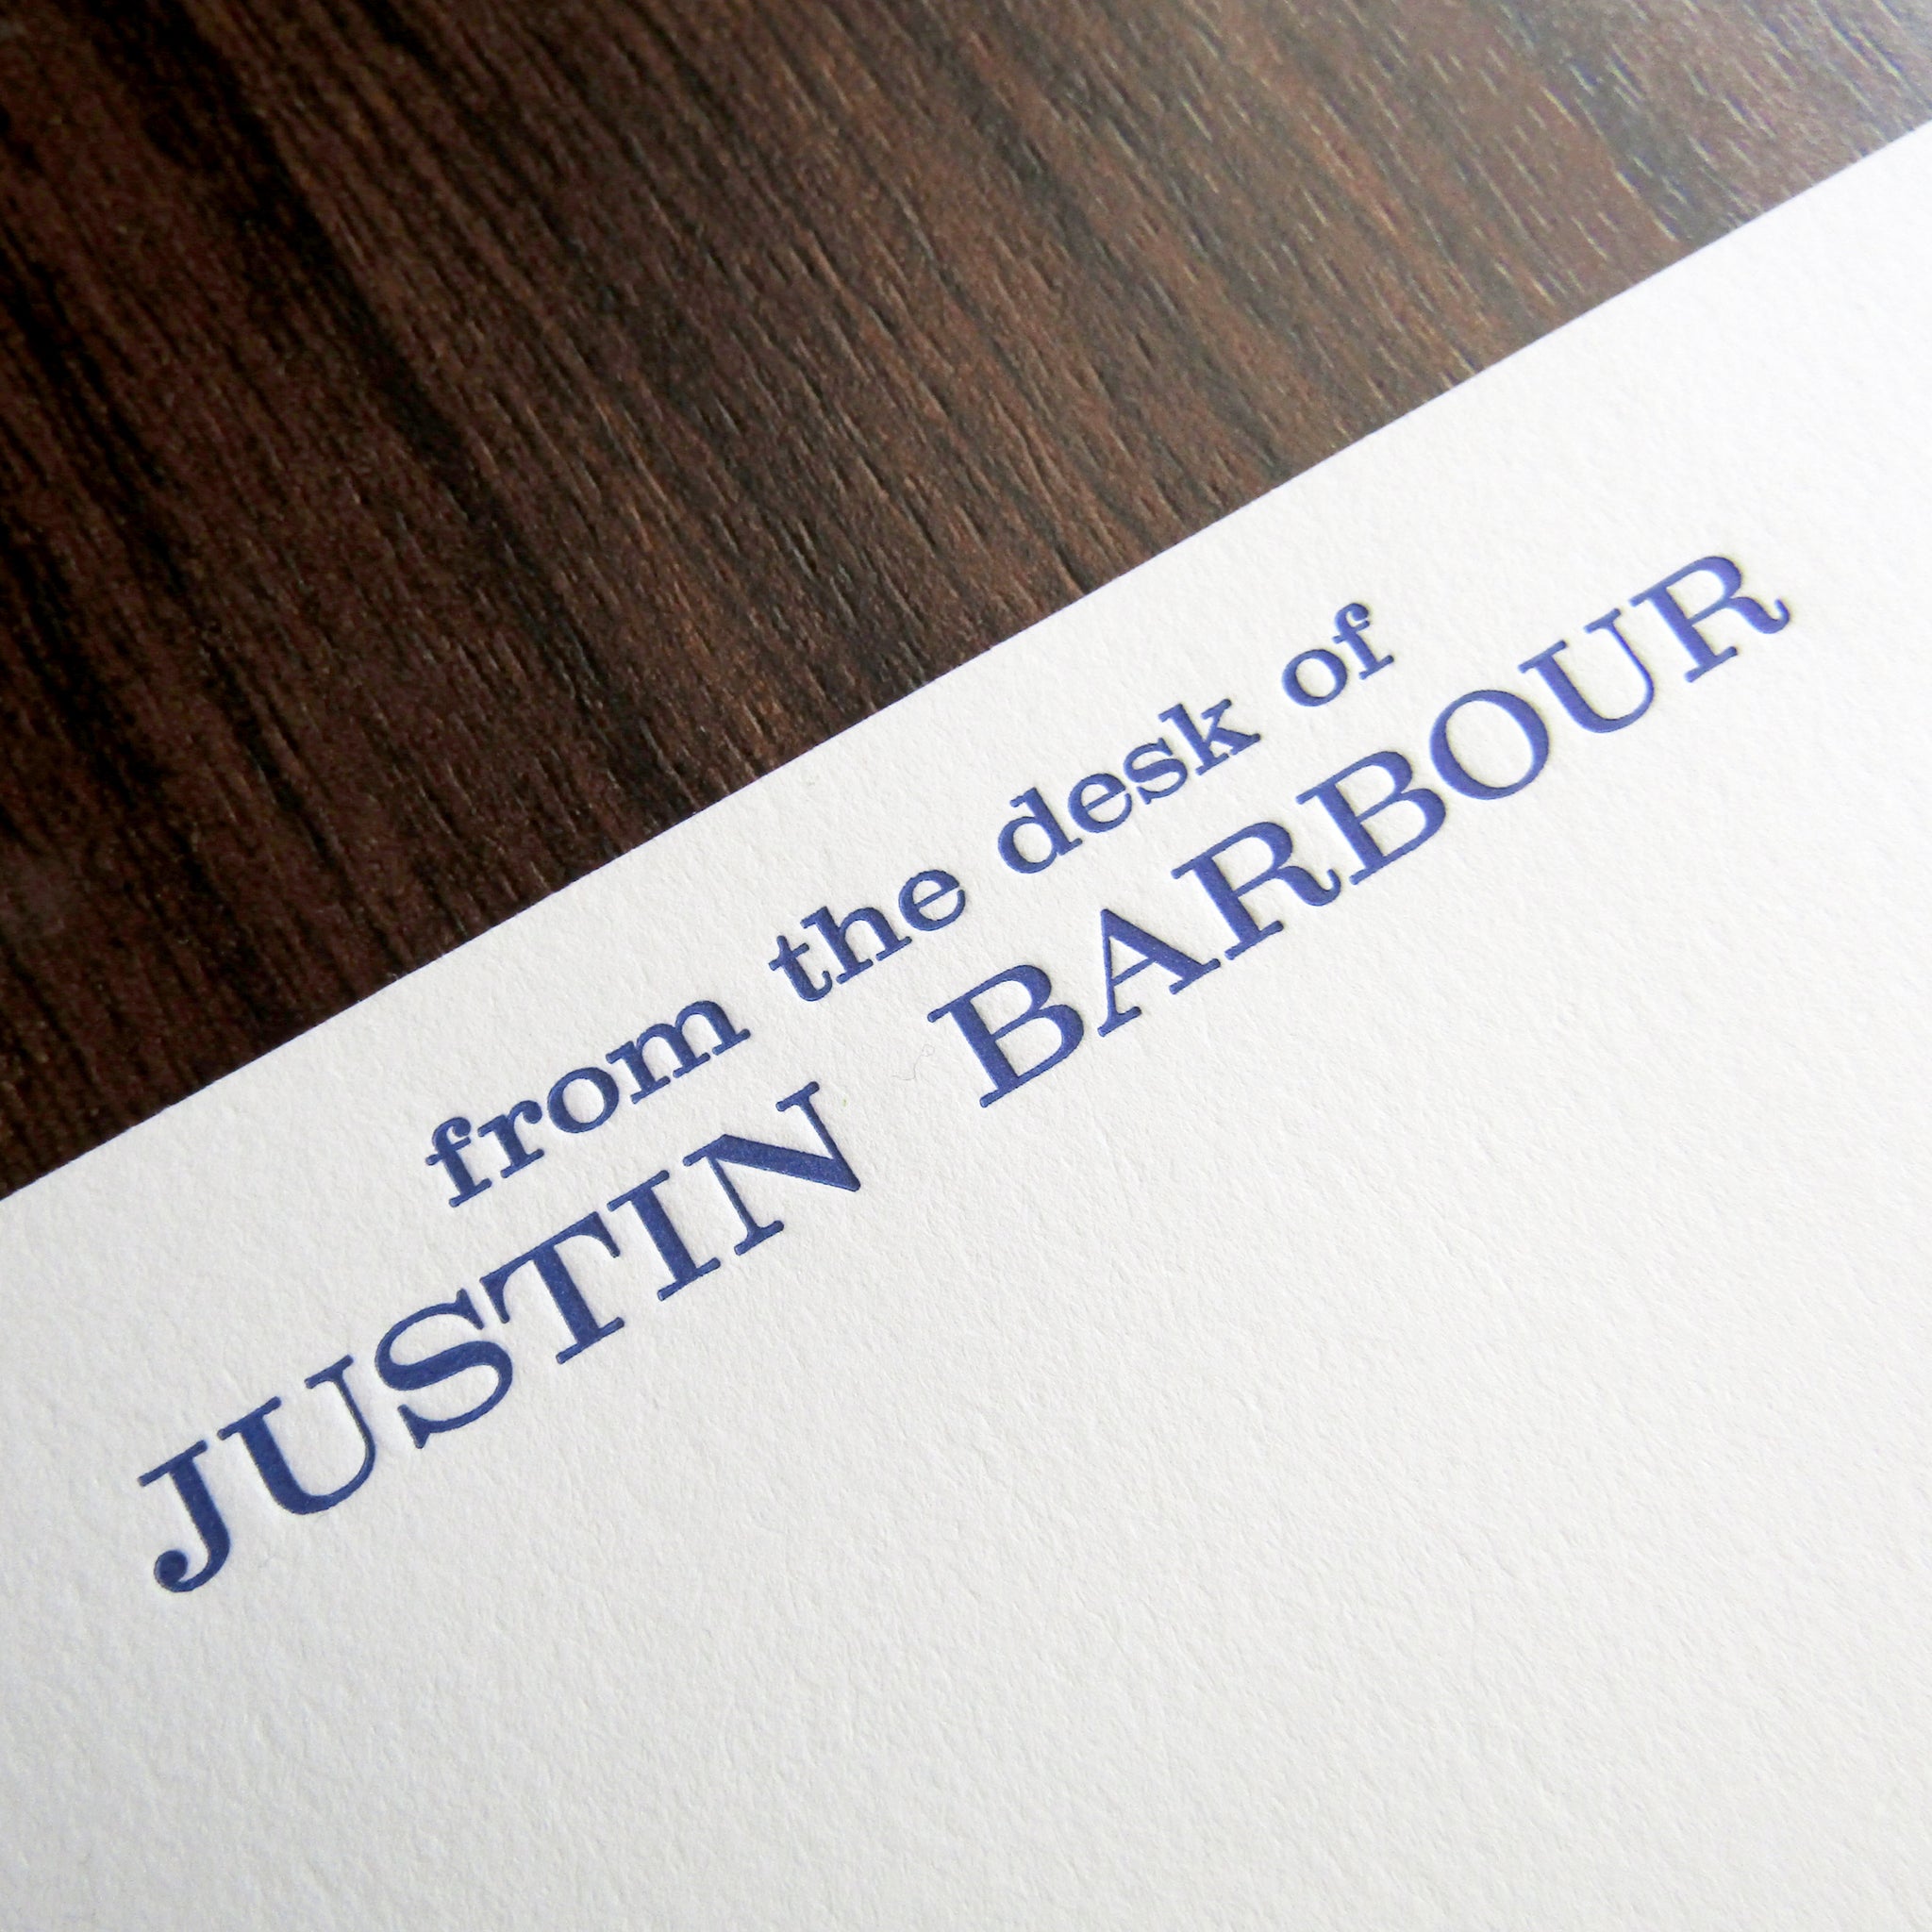 Inviting Professional Letterpressed Personal Stationery From The